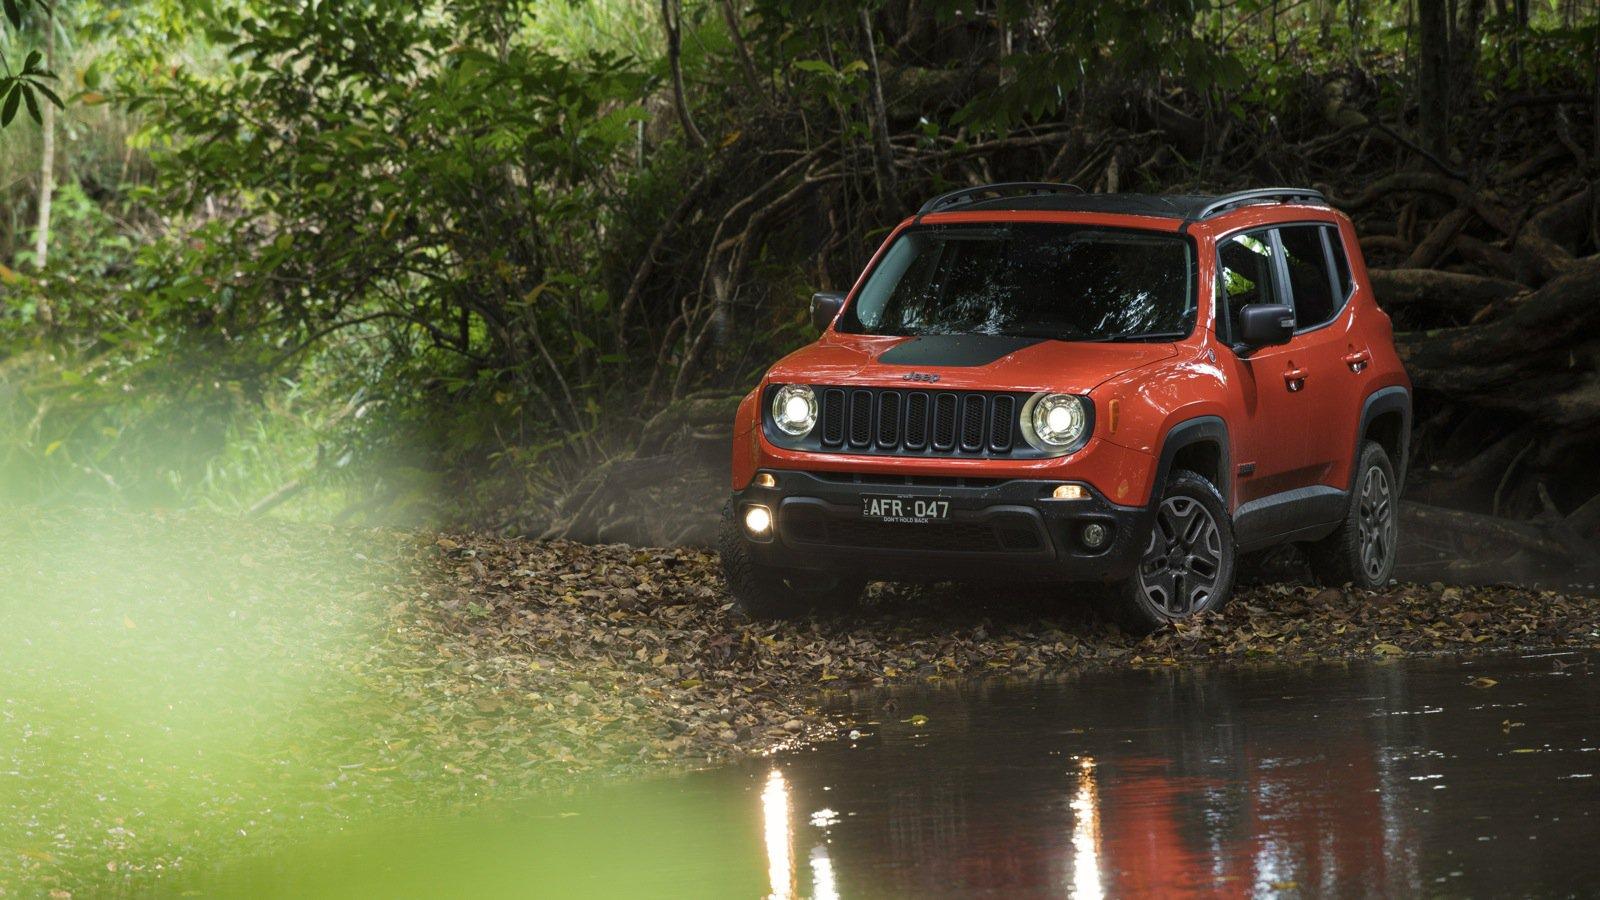 Jeep Renegade Wallpapers Top Free Jeep Renegade Backgrounds Wallpaperaccess